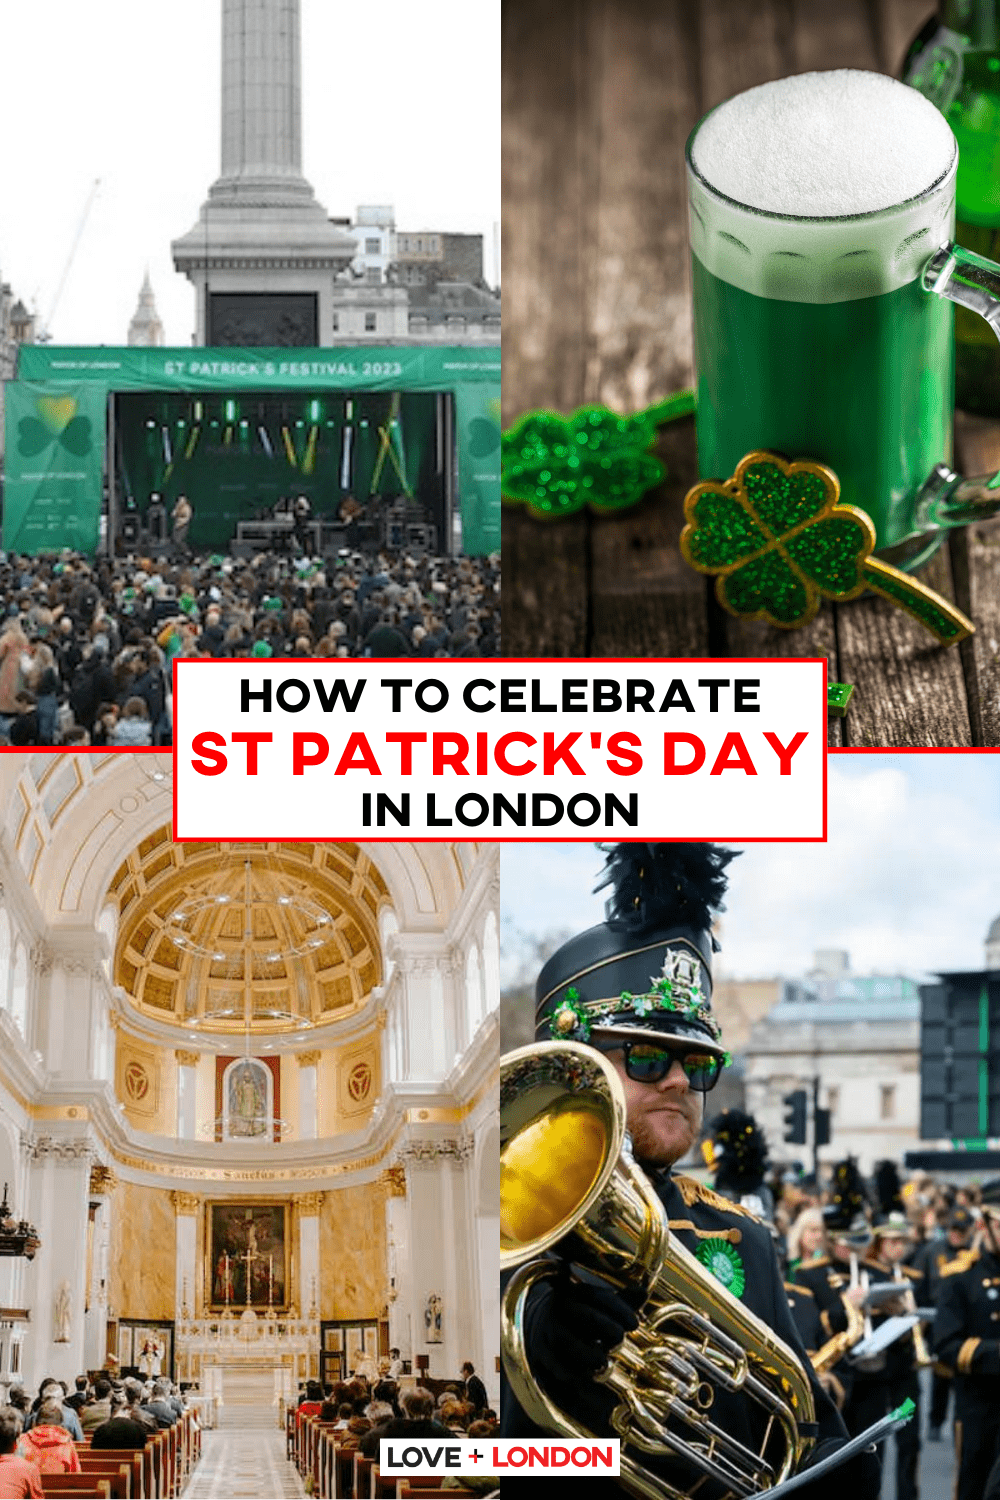 This is an image from Pinterest of four images in a grid showing different st patricks day celebrations in London featuring musicians, a church, a green drink in a pint glass and outside festival. 